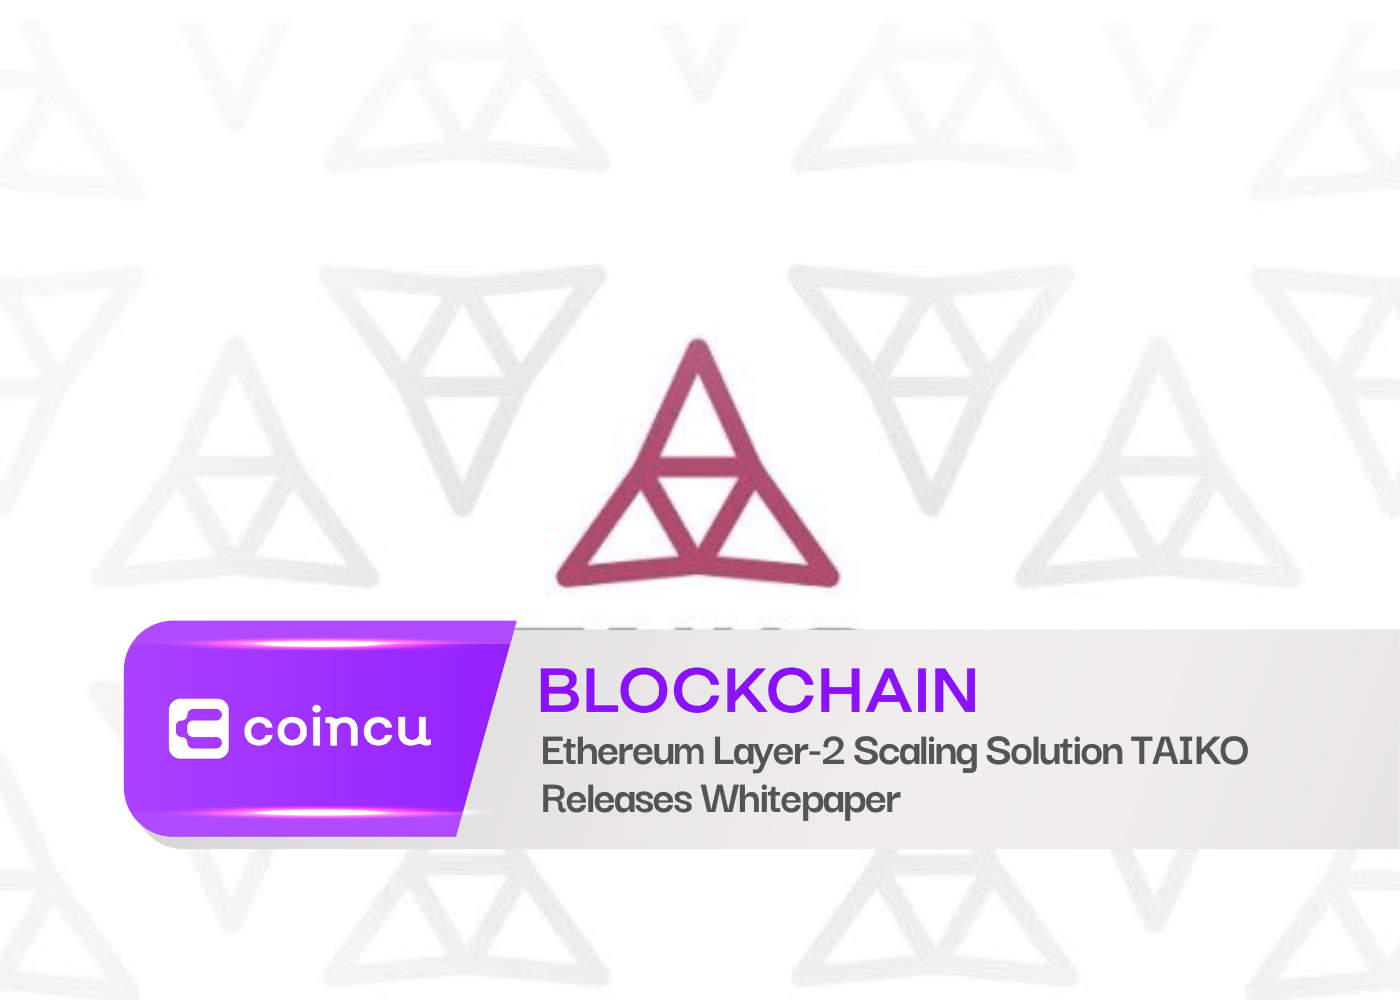 Ethereum Layer-2 Scaling Solution TAIKO Releases Whitepaper